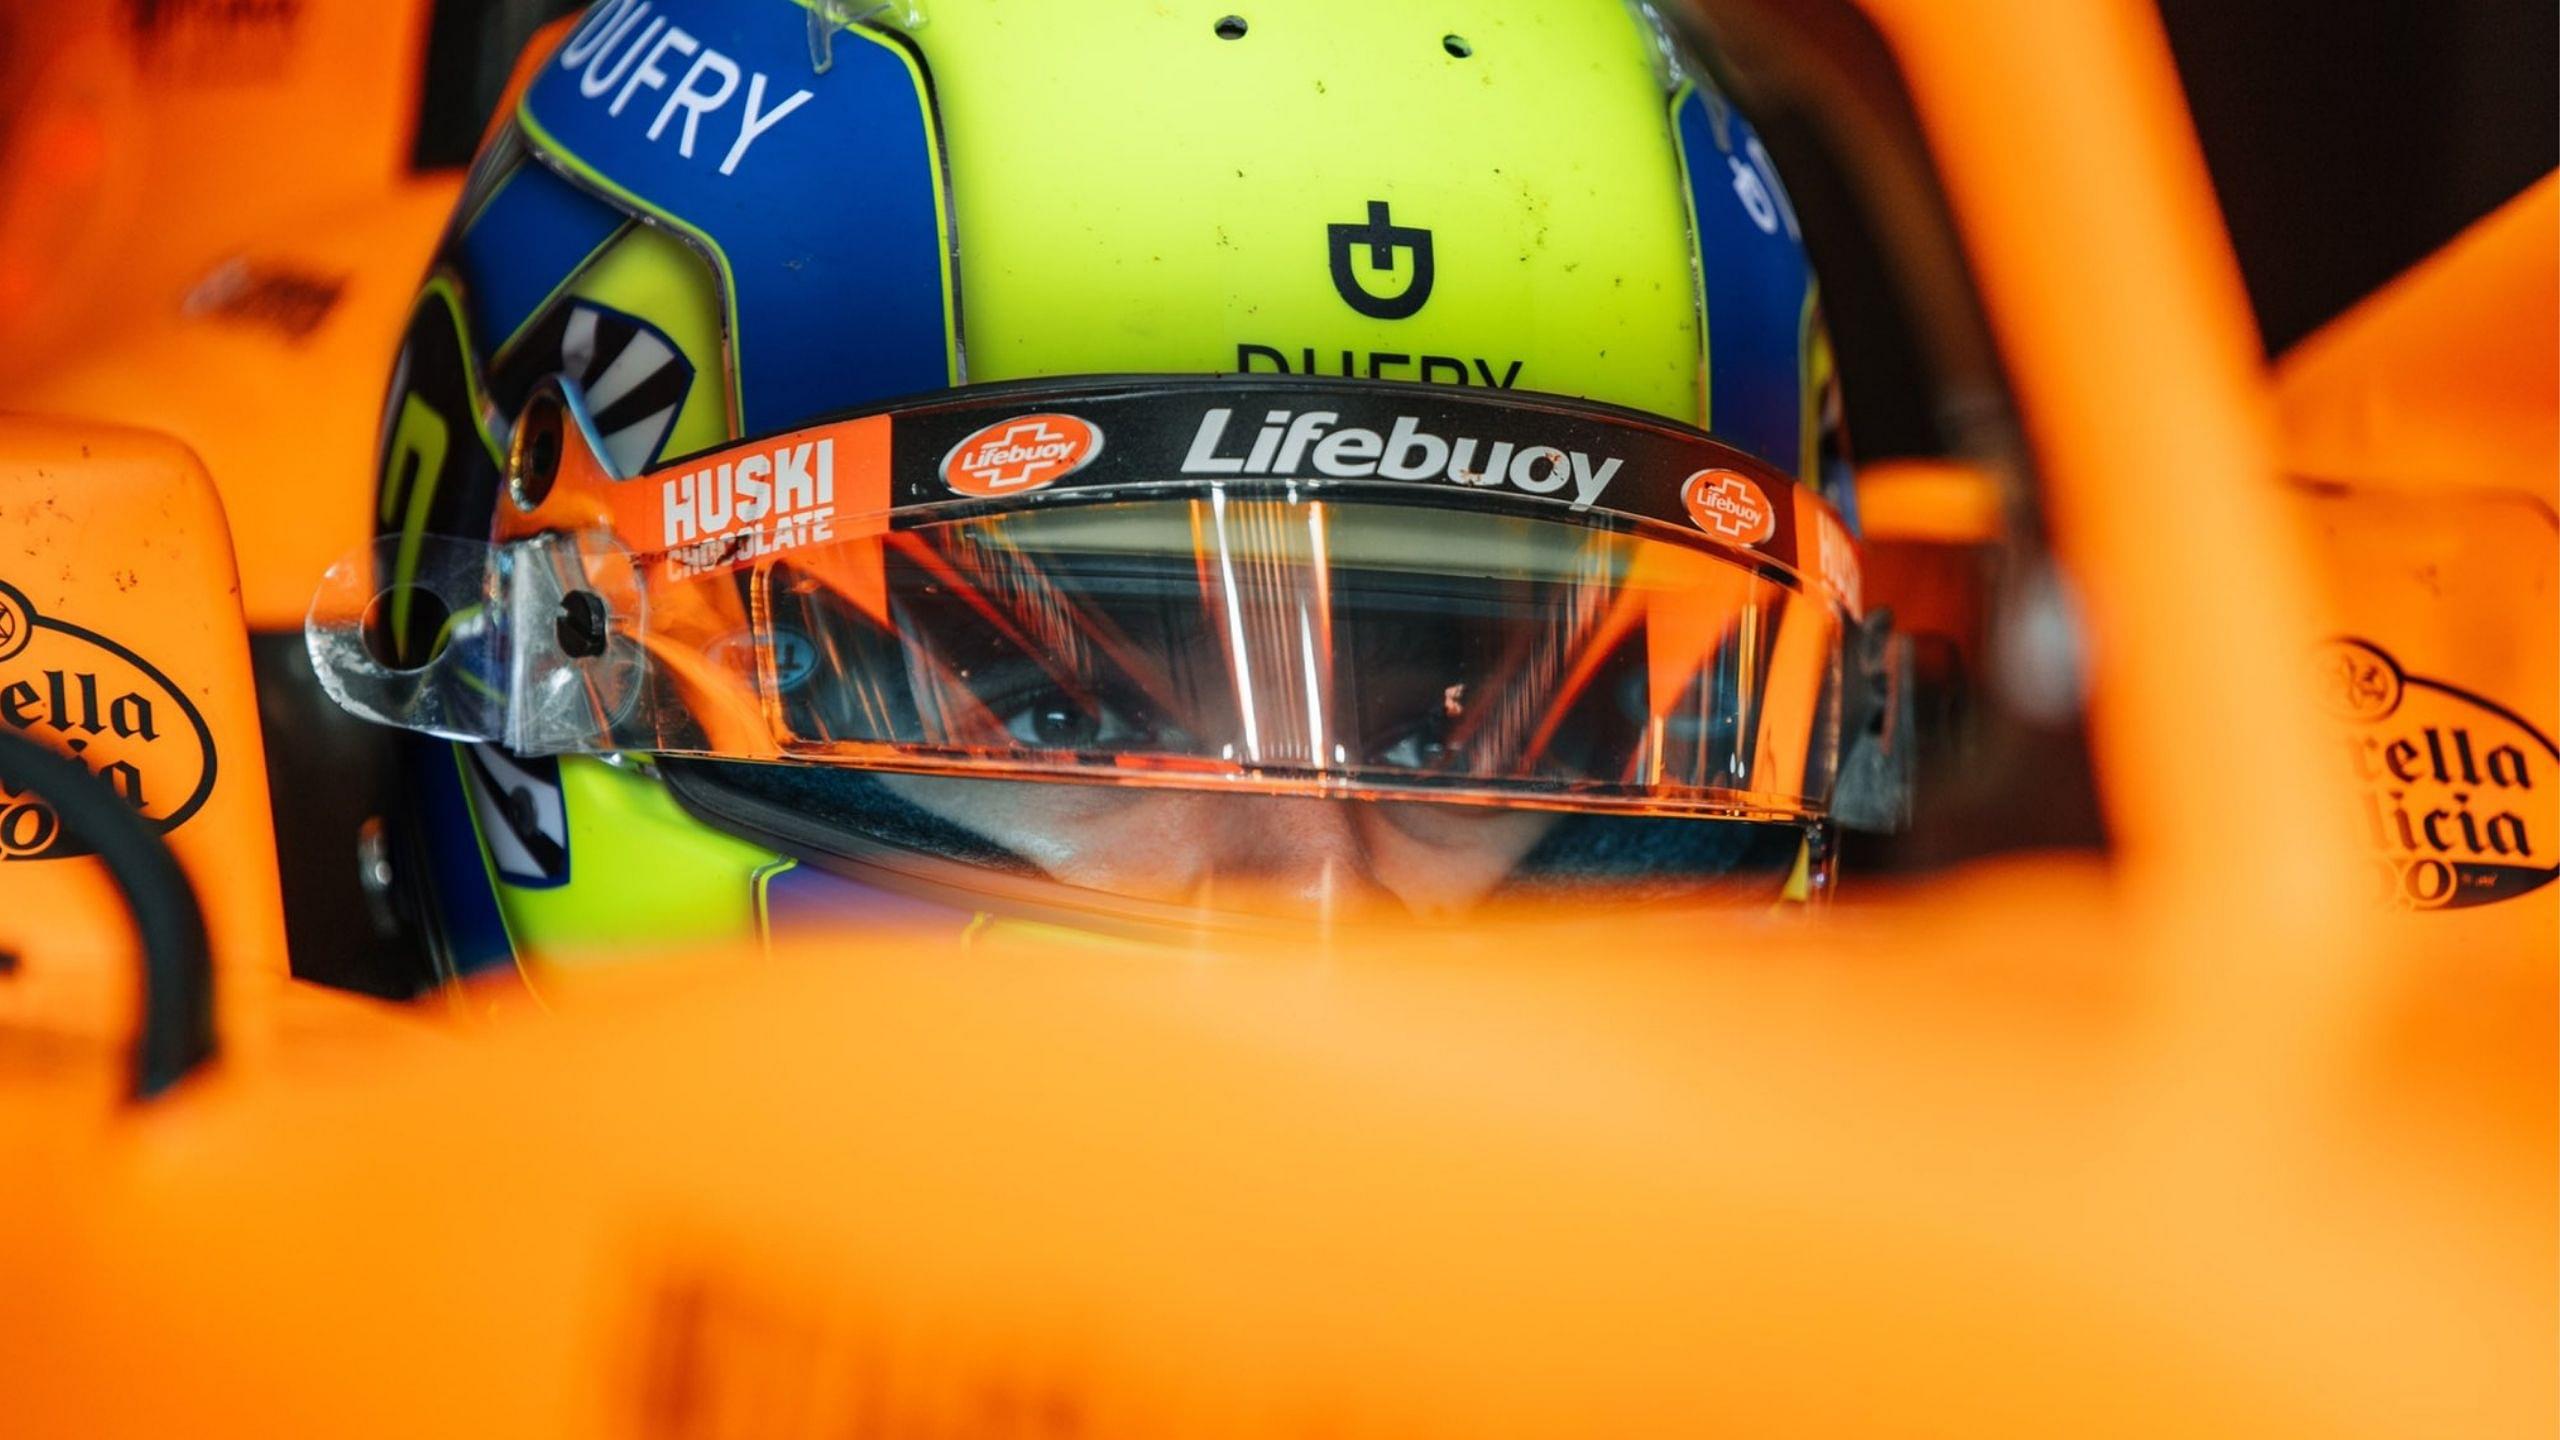 "I owe an apology" - Lando Norris apologizes to Lance Stroll after abusing him on team radio during Portuguese Grand Prix